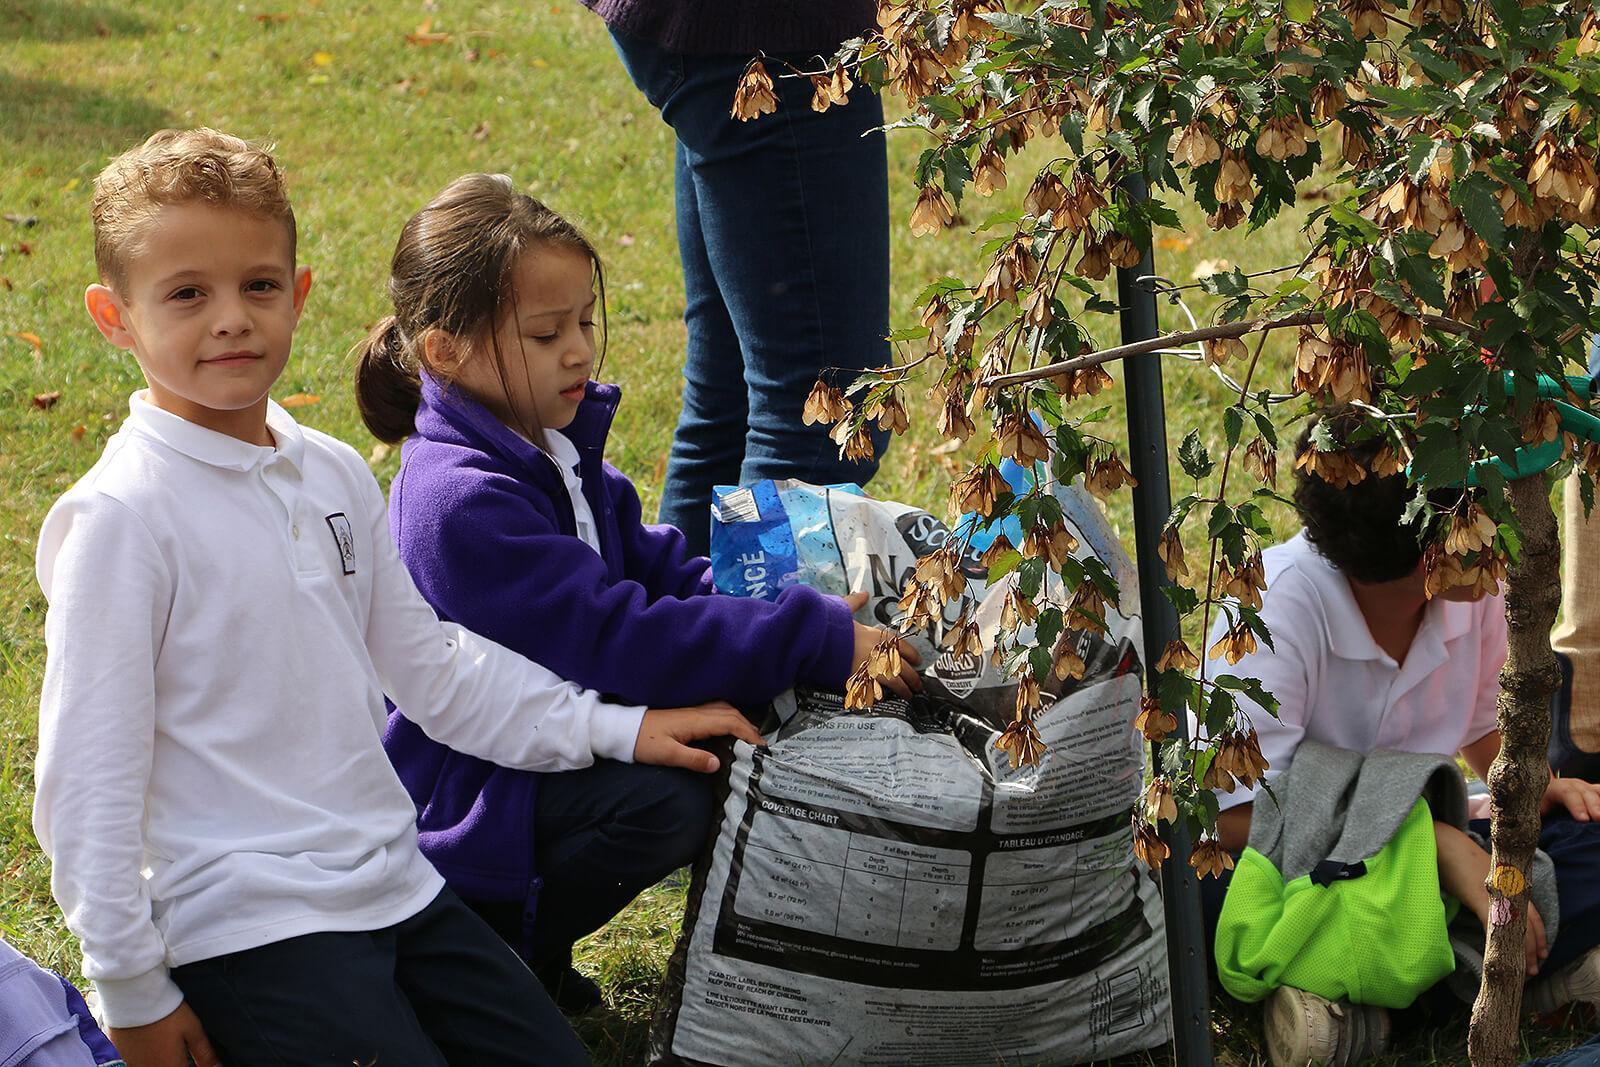 Tree donation inspires student learning